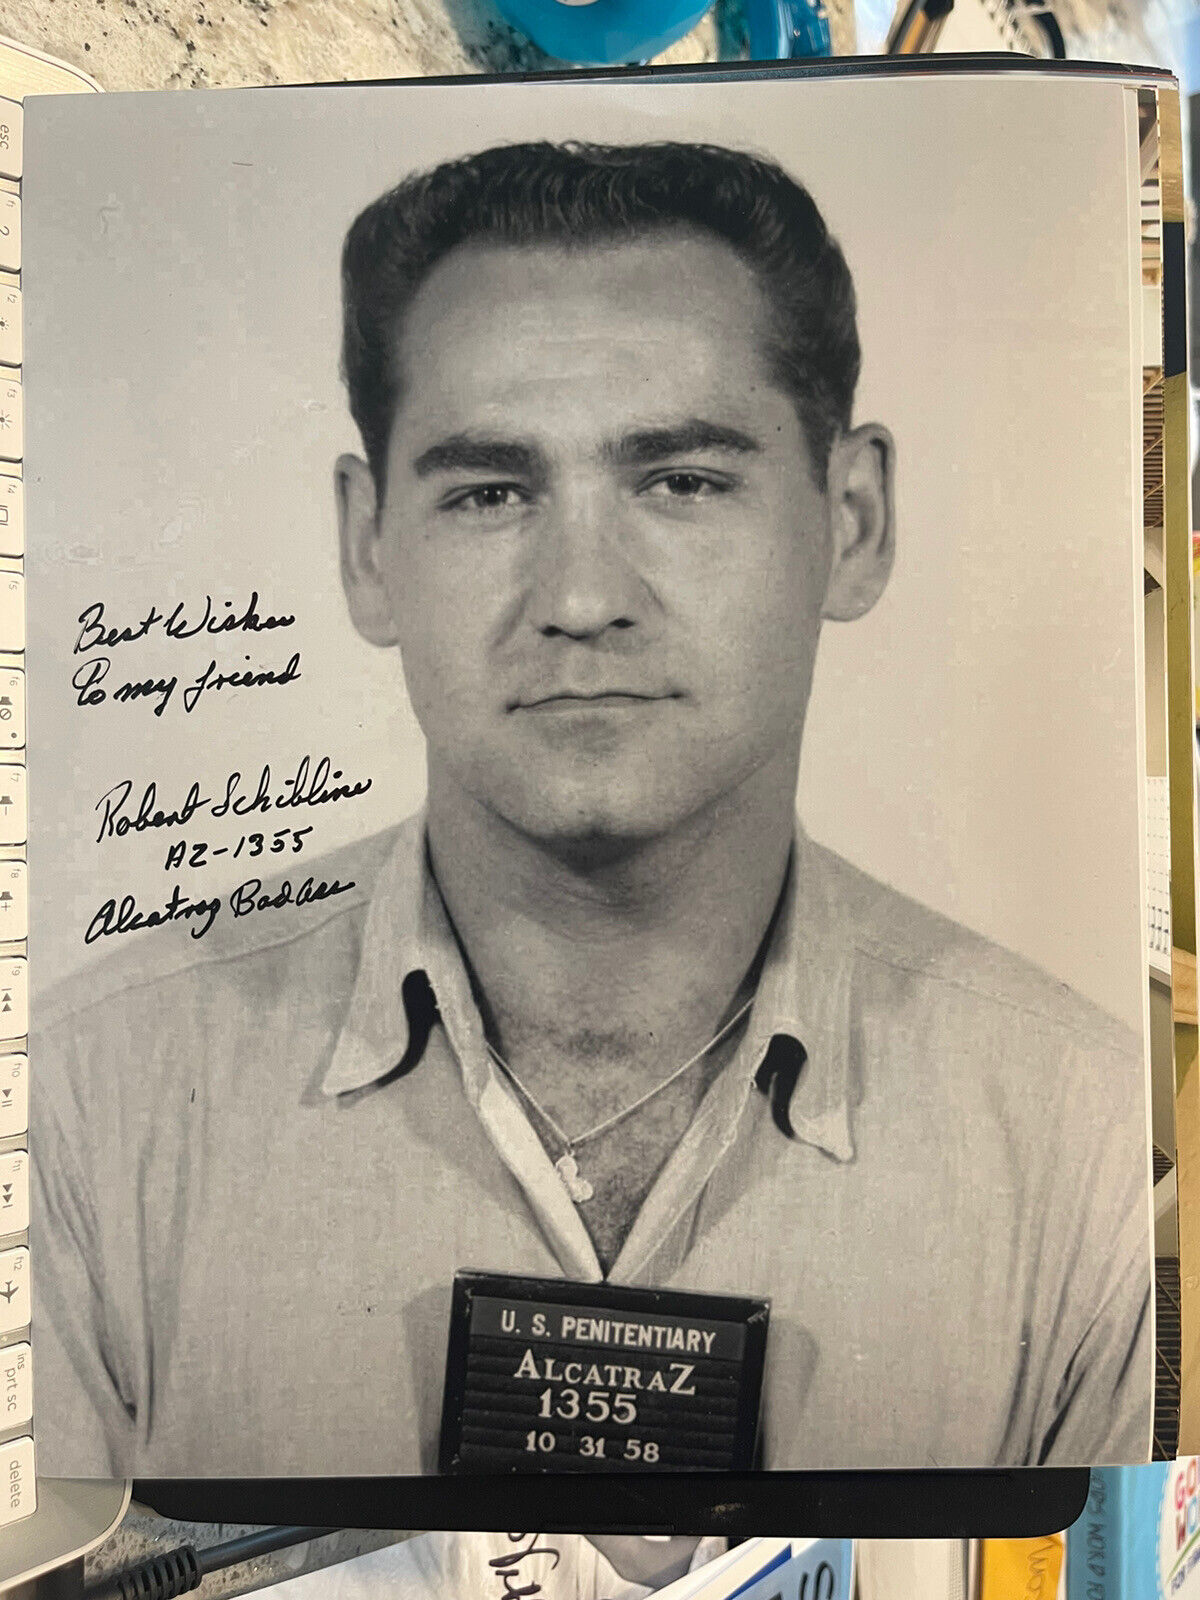 ROBERT SCHIBLINE SIGNED AUTOGRAPHED 8x10 Photo Poster painting FORMER ALCATRAZ INMATE BECKETT D1